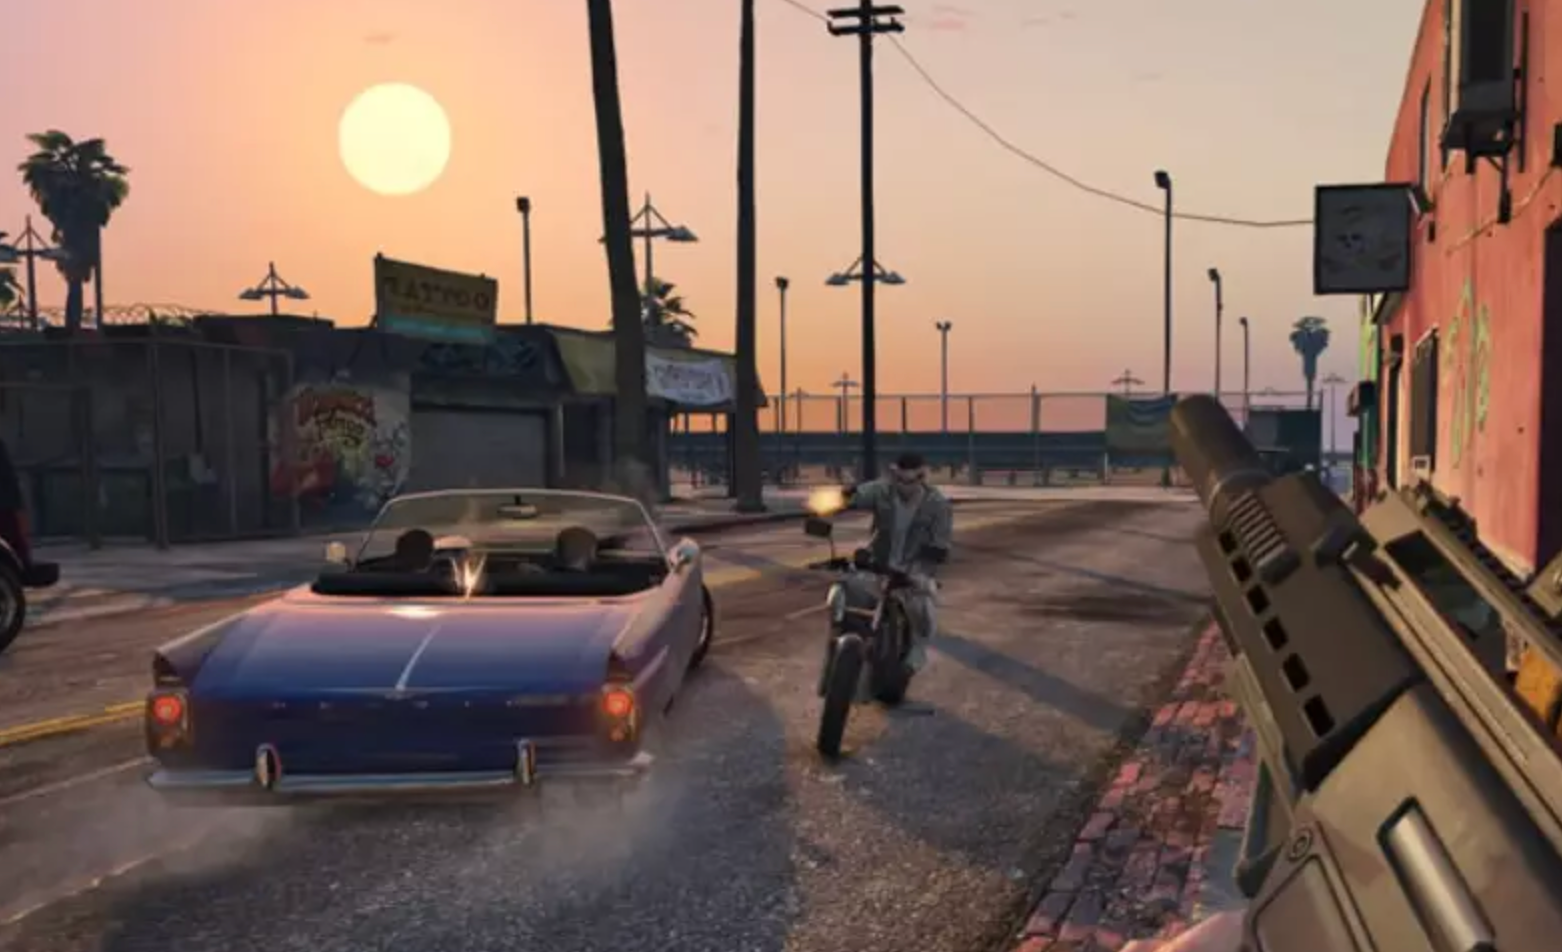 GTA 6 leak reveals massive file size with endless gameplay